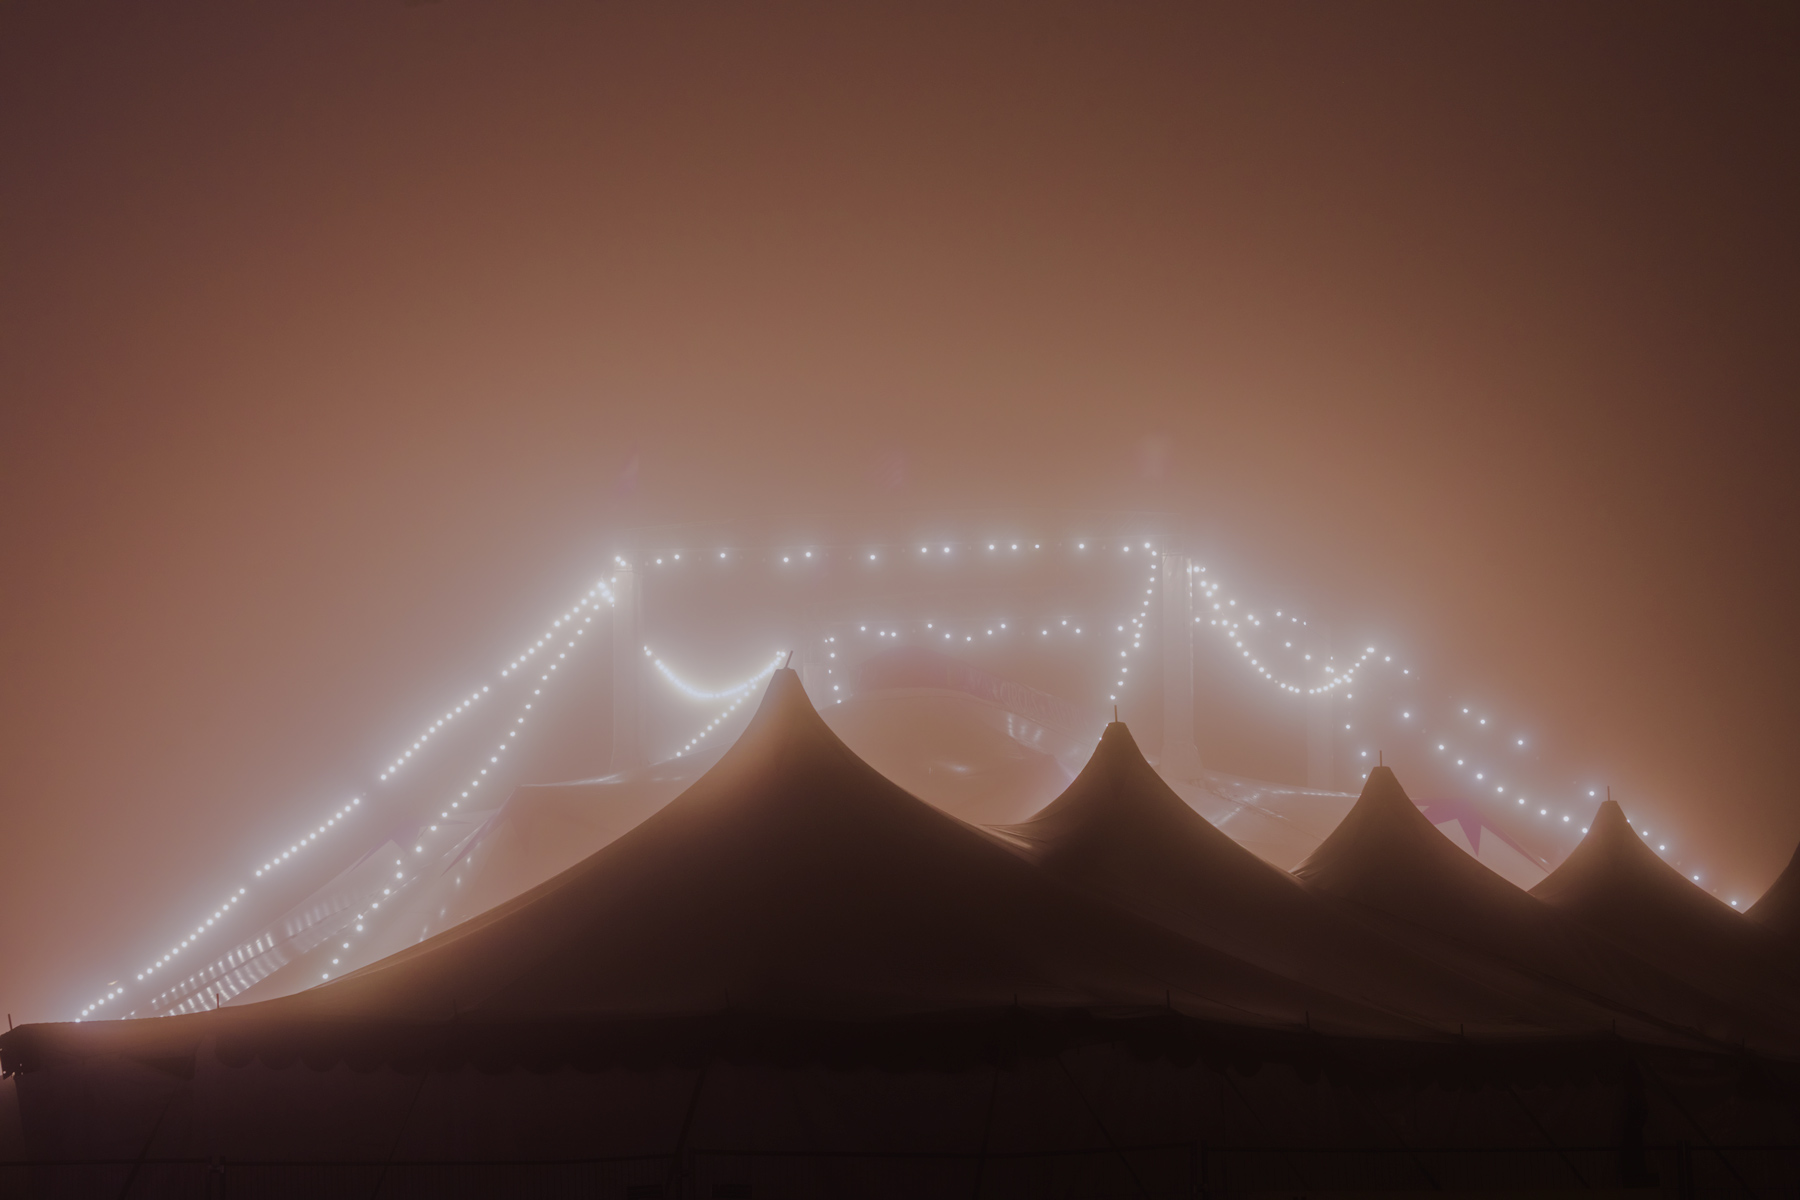 Foggy night in Vienna, lights of the circus. Fine art photography.